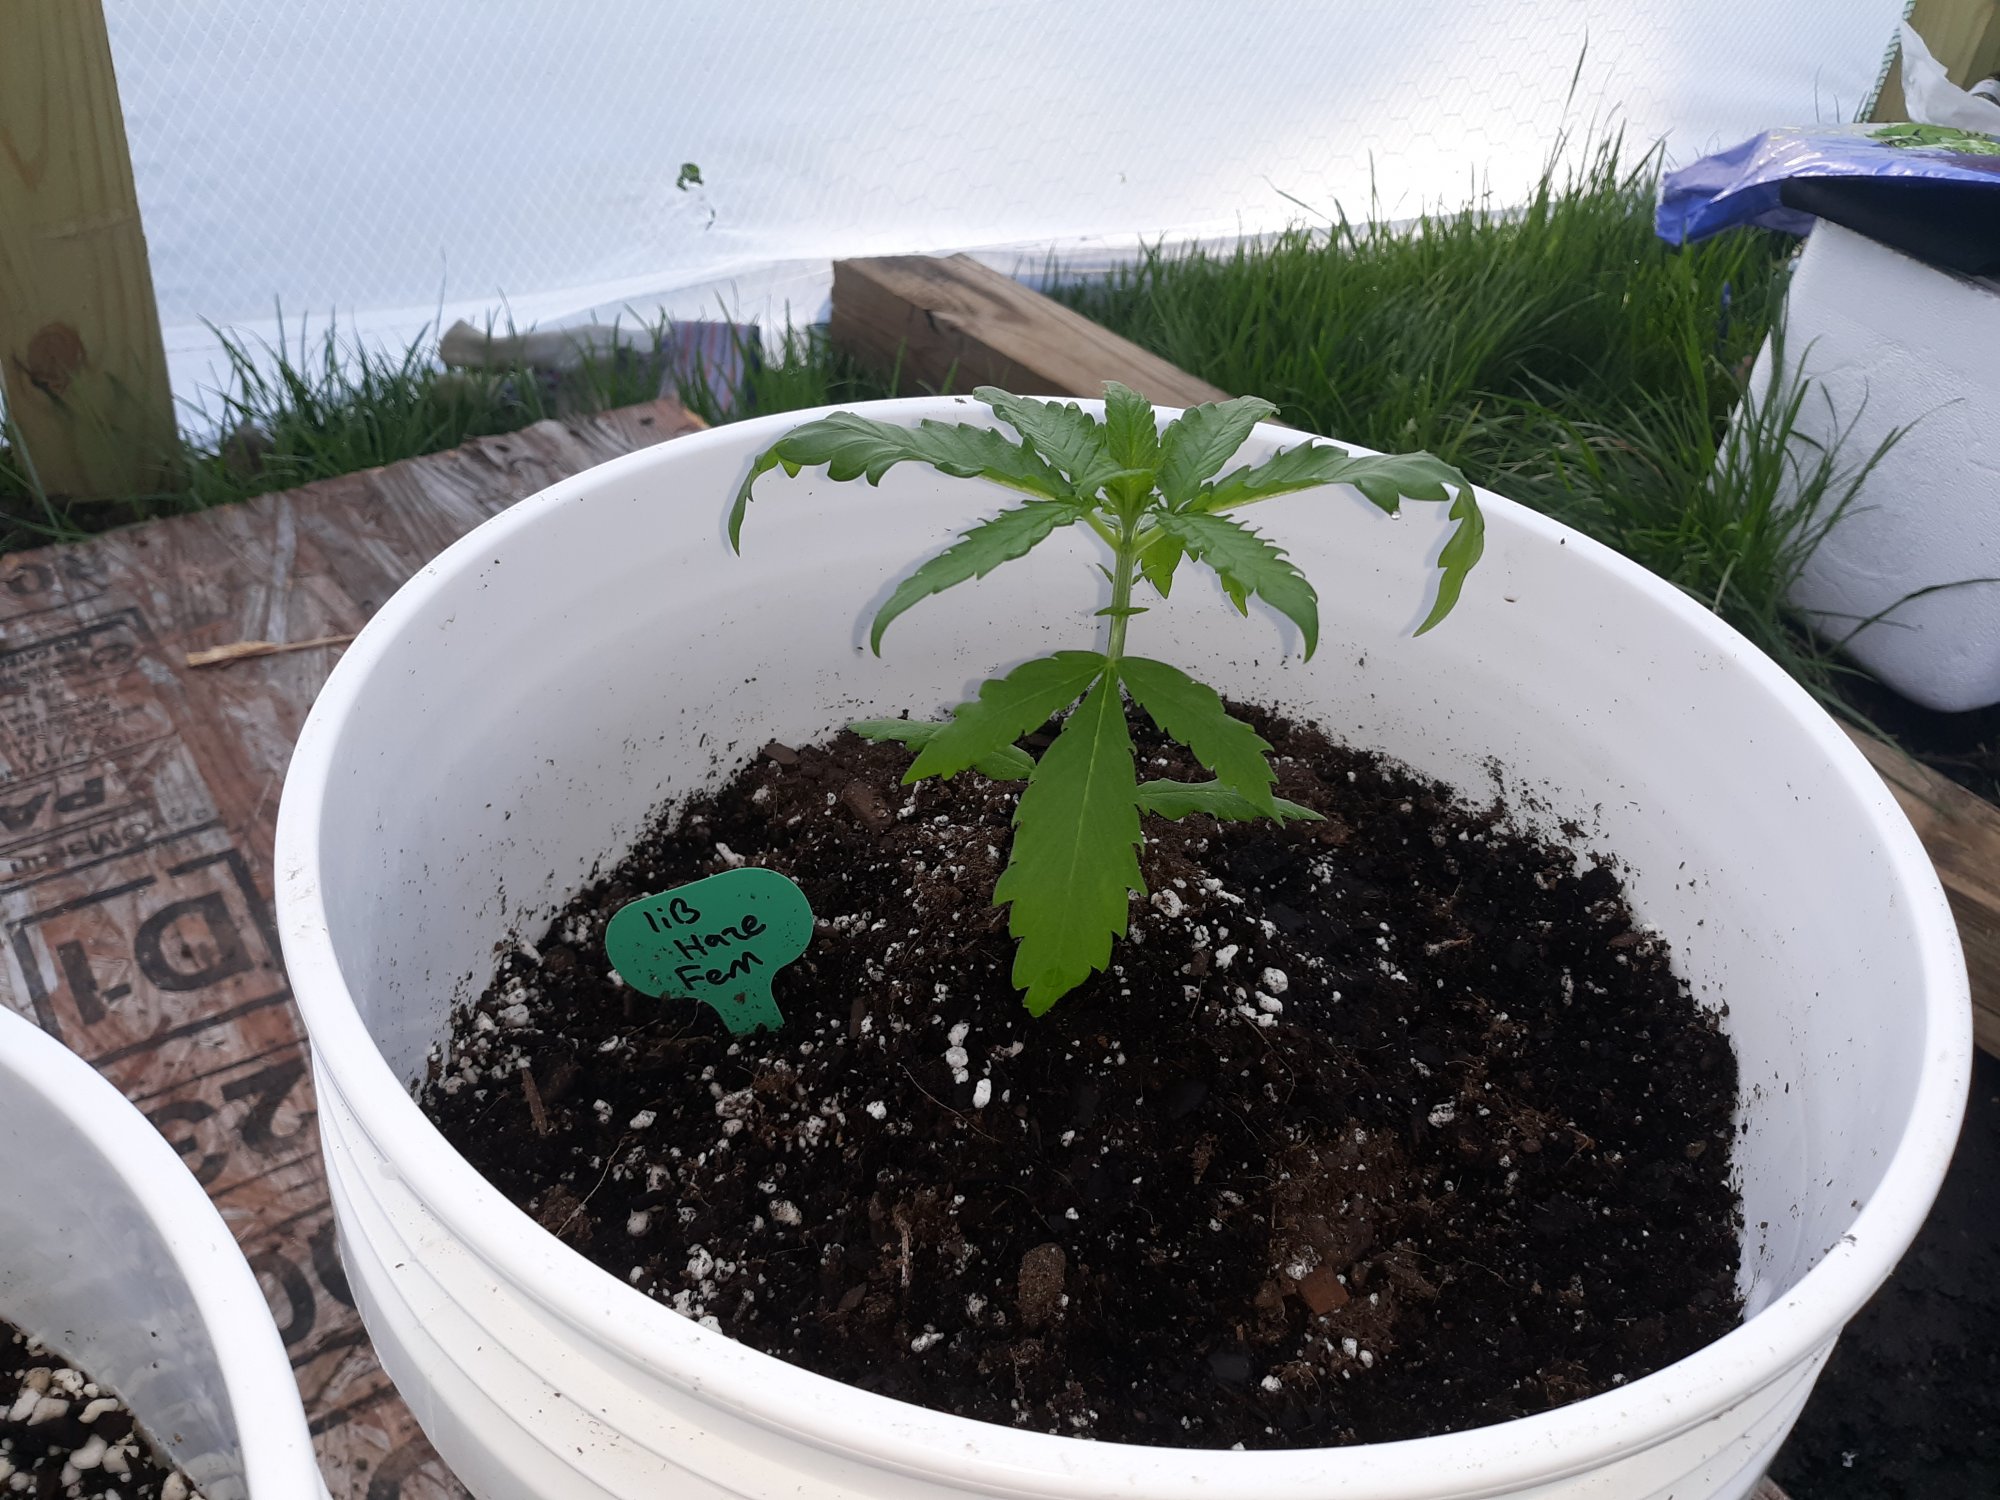 Relatively newer outdoor grower question 3